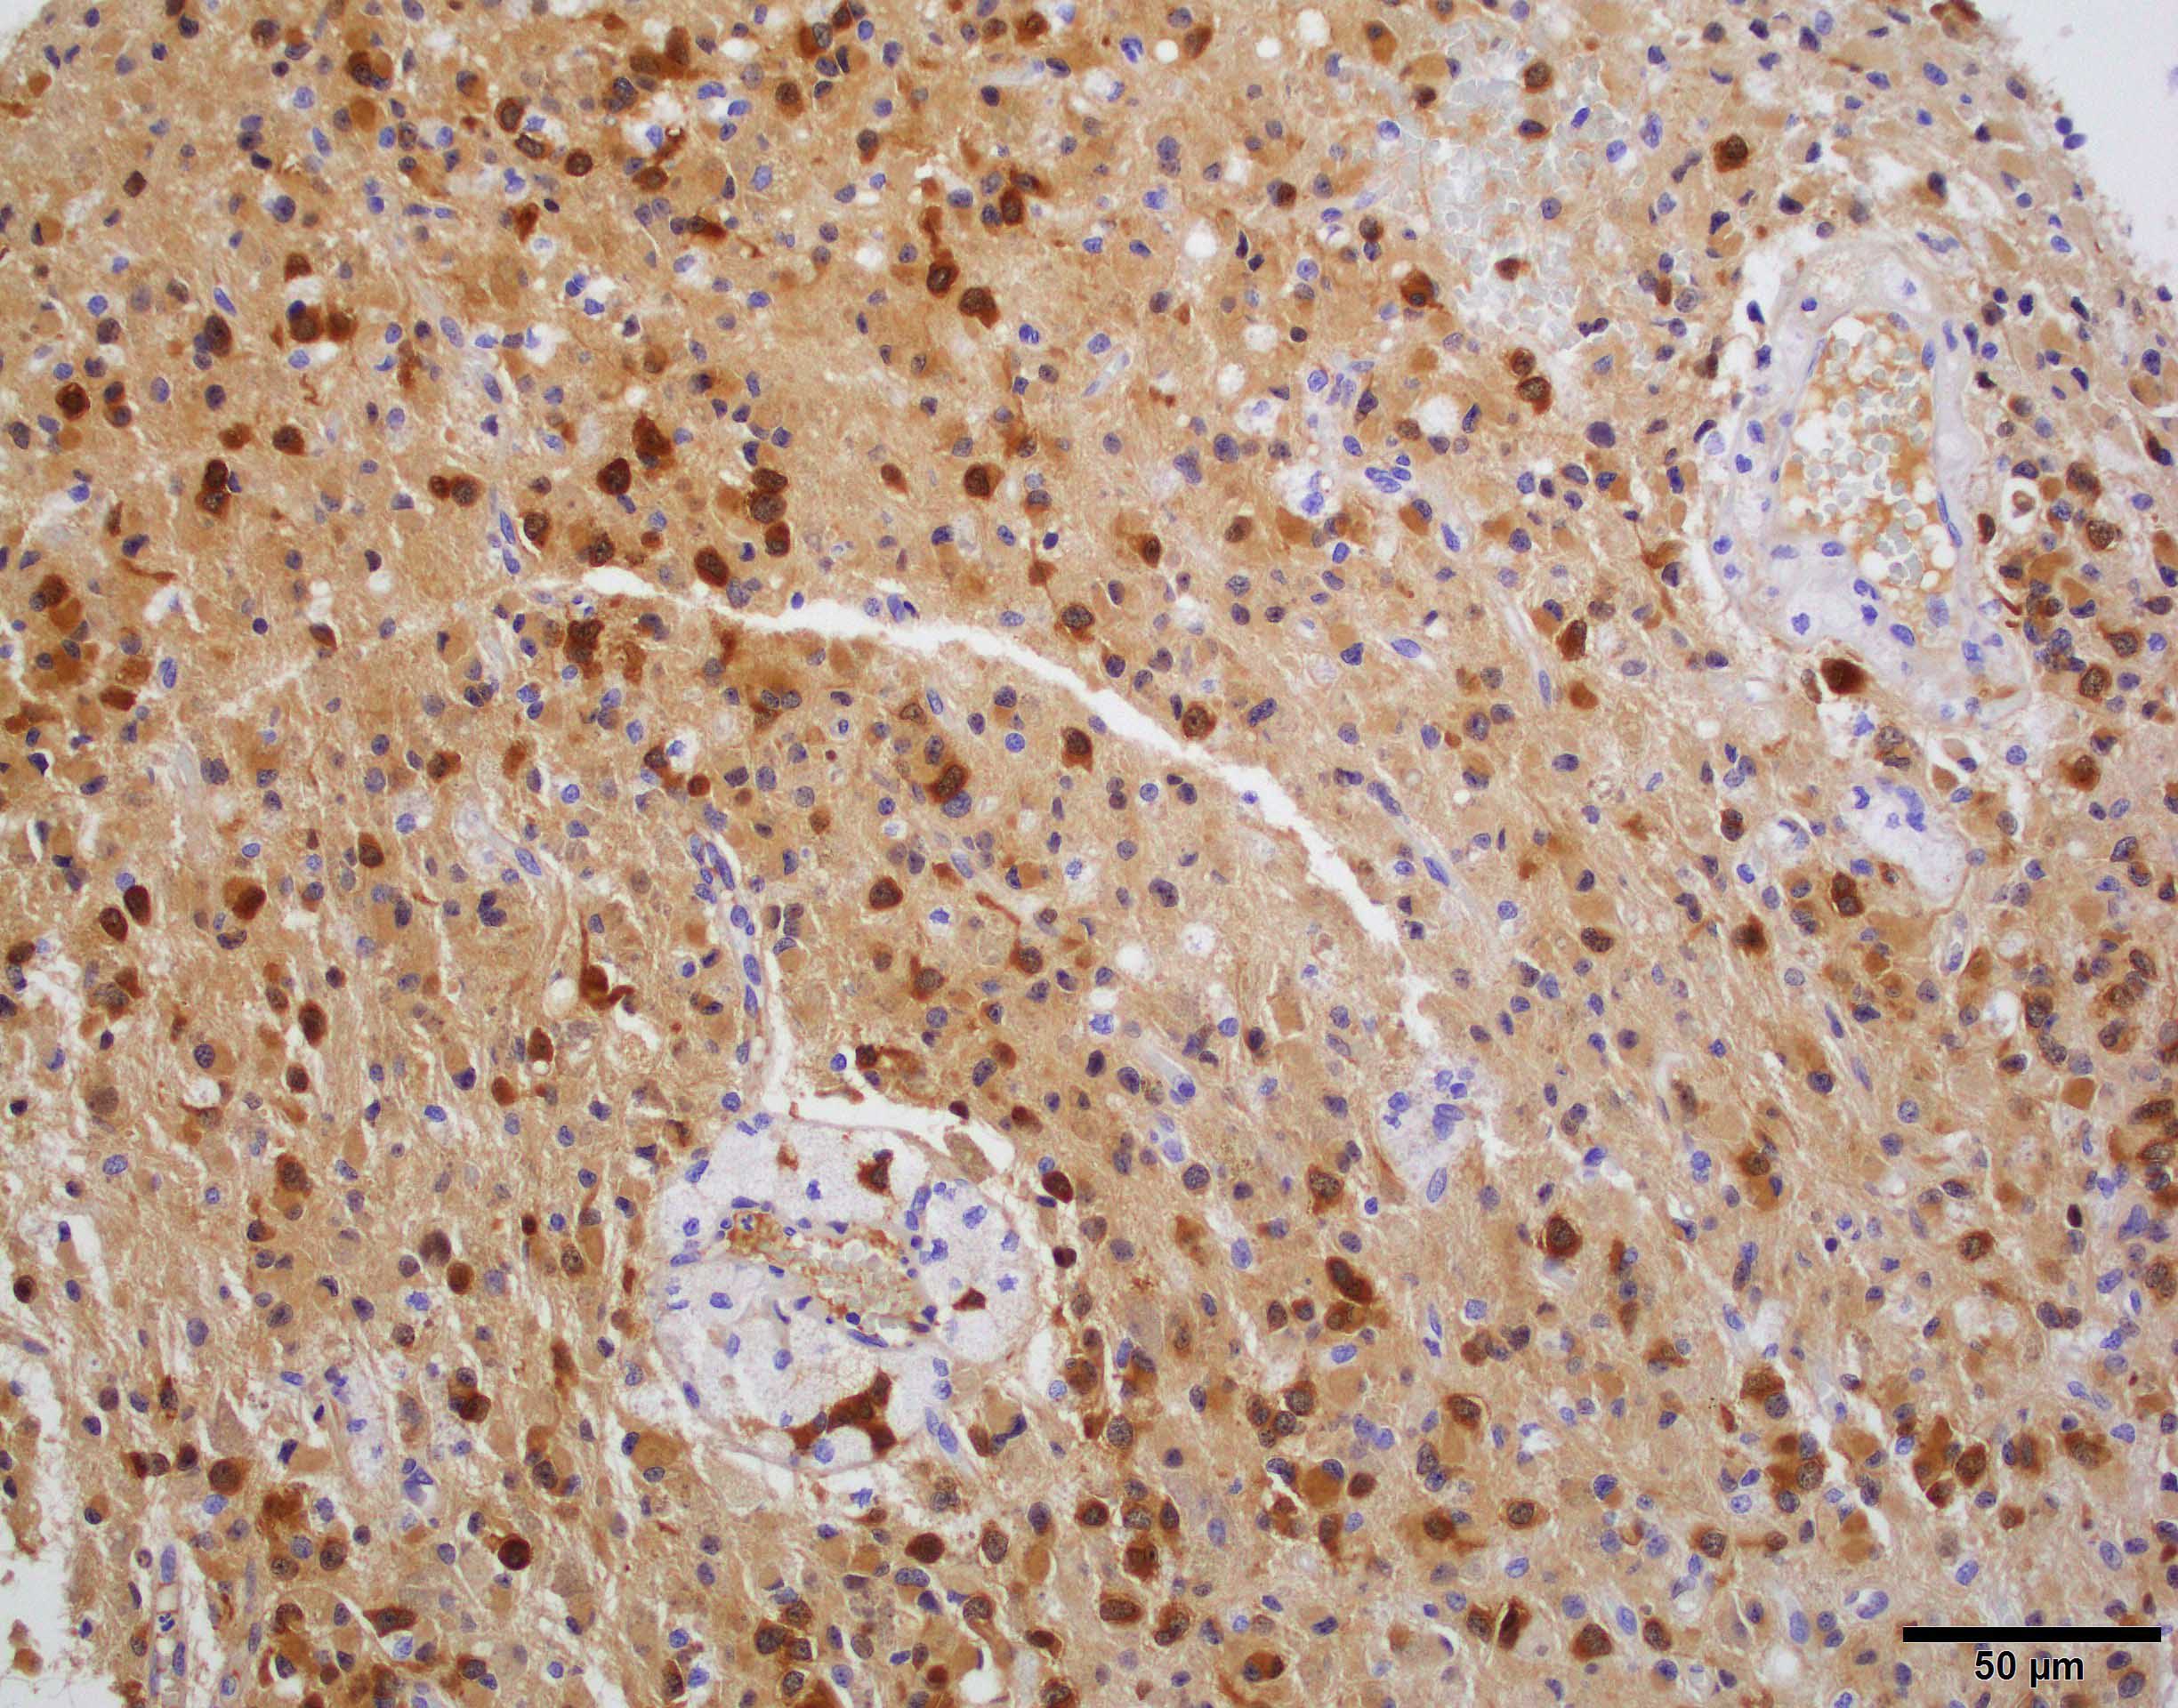 IDH low grade astrocytoma